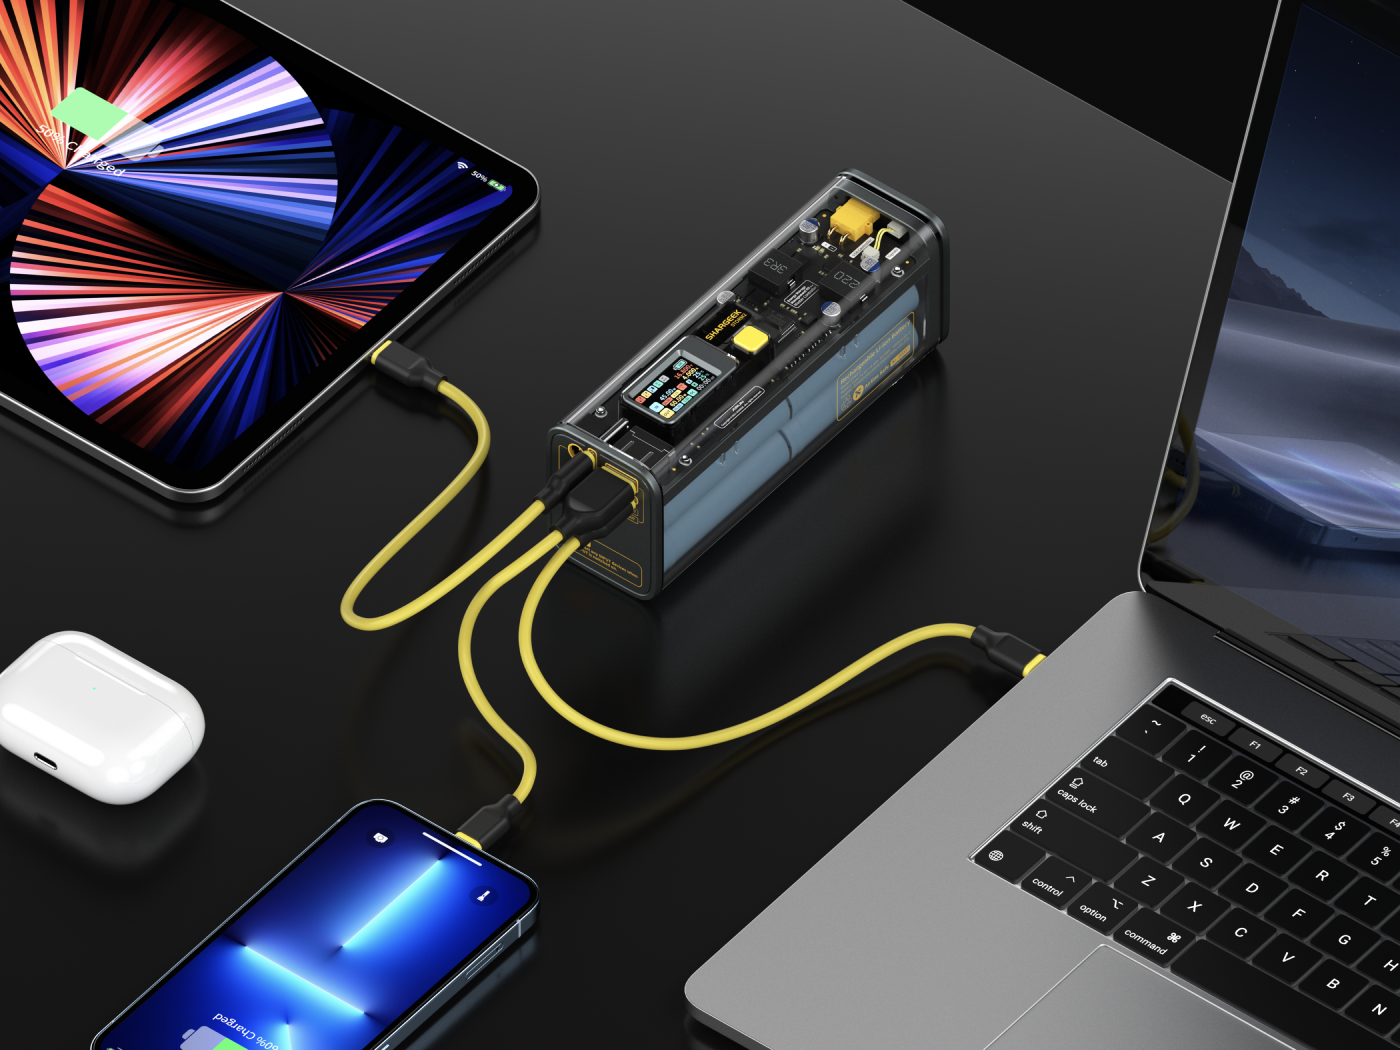 Sharge Flow Mini Power Bank, Battlestations, Desk Accessories, Chargers